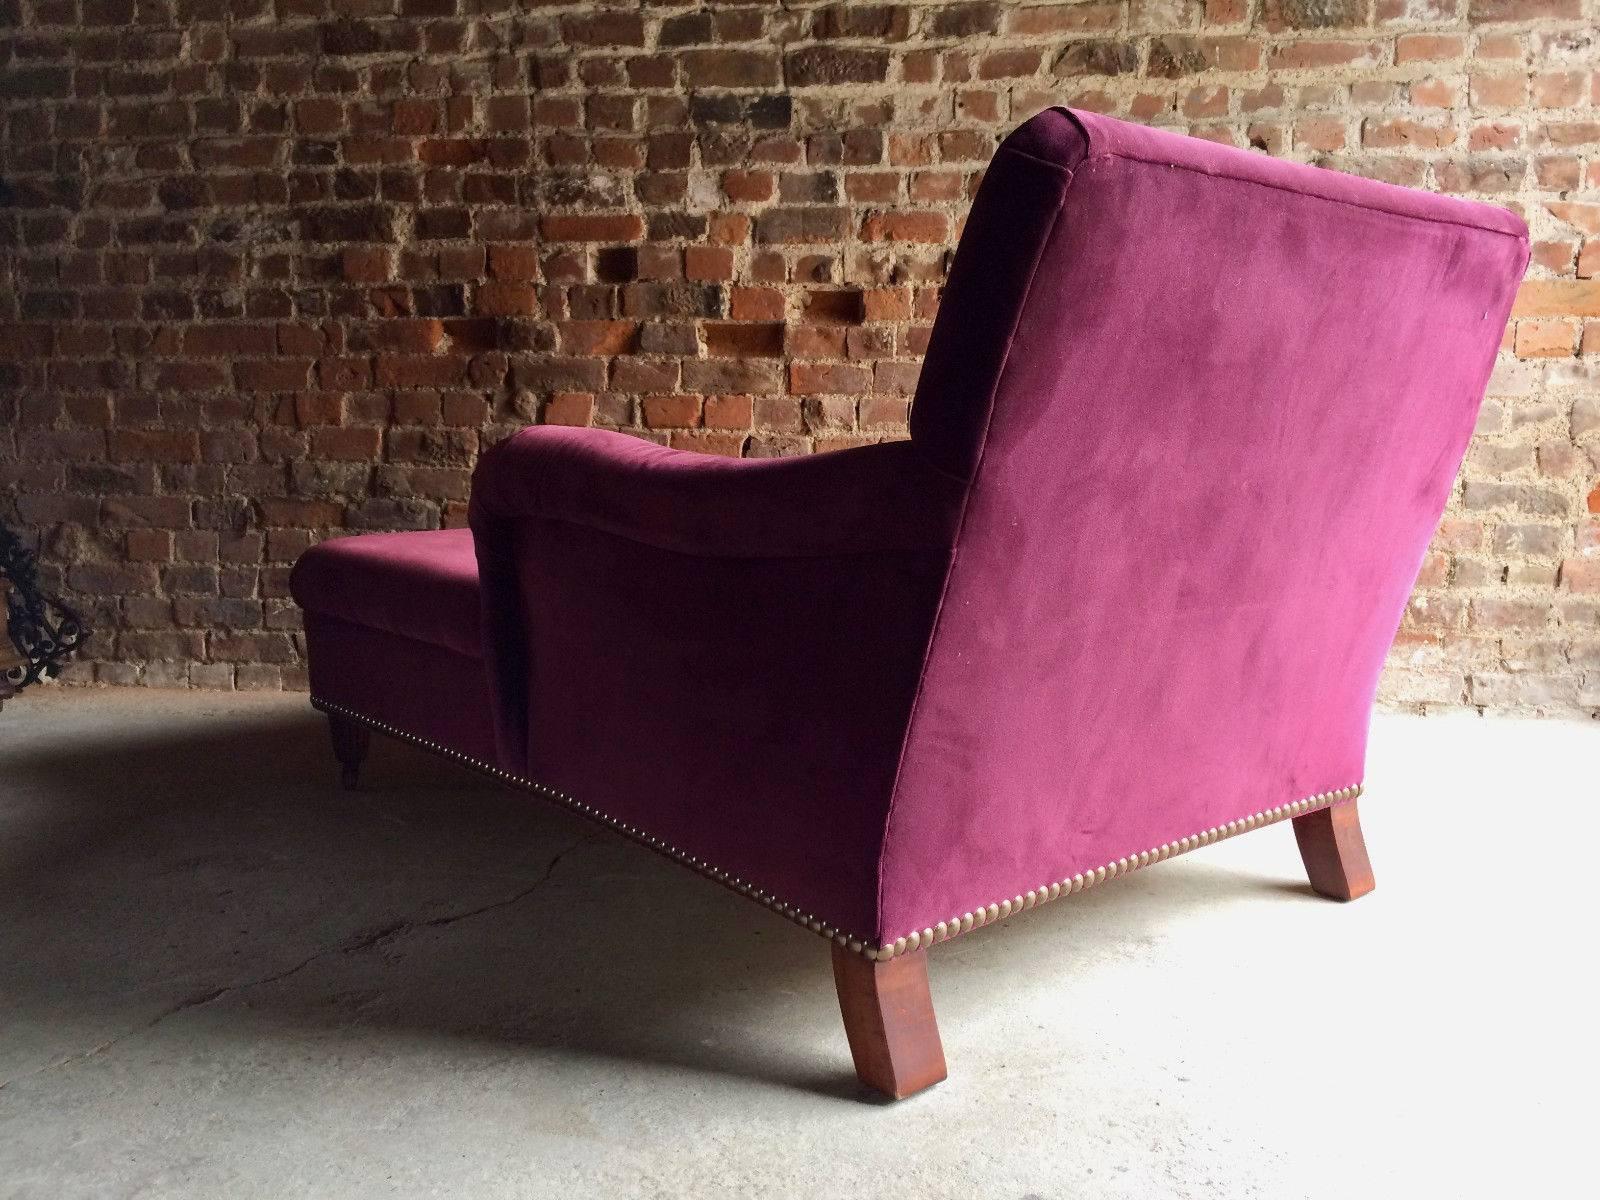 A breathtakingly beautiful Ralph Lauren Bohemian chaise longue 'Loveseat' offered in almost new condition, this chaise is an elegant piece of furniture that sits in-between a couch and a chair and is upholstered in a deep luxurious burgundy velvet